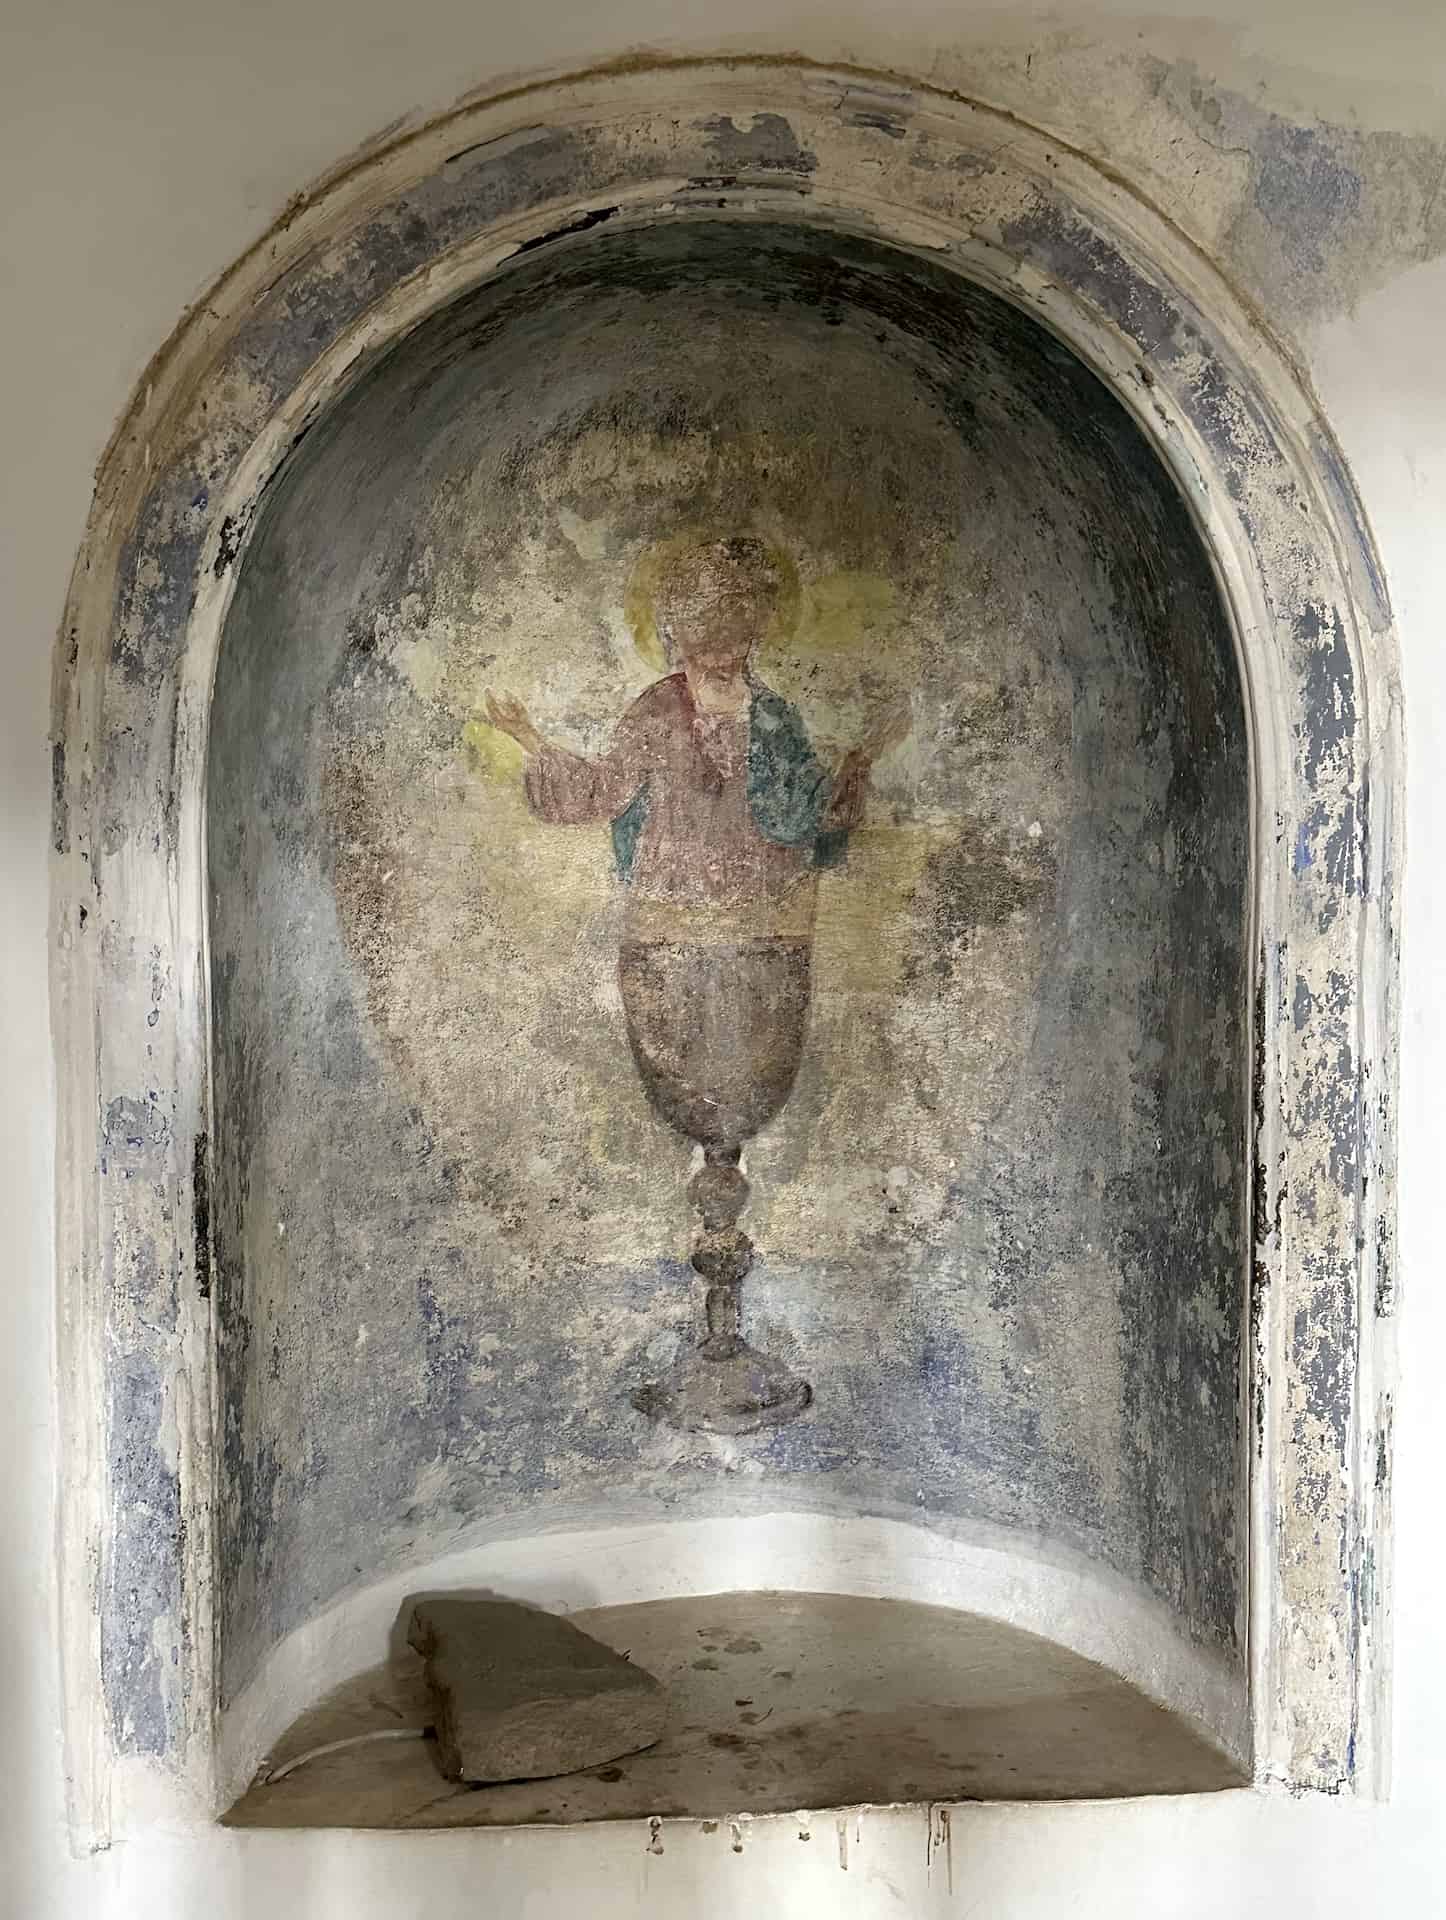 Fresco in a niche behind the iconostasis at the Church of St. Demetrios